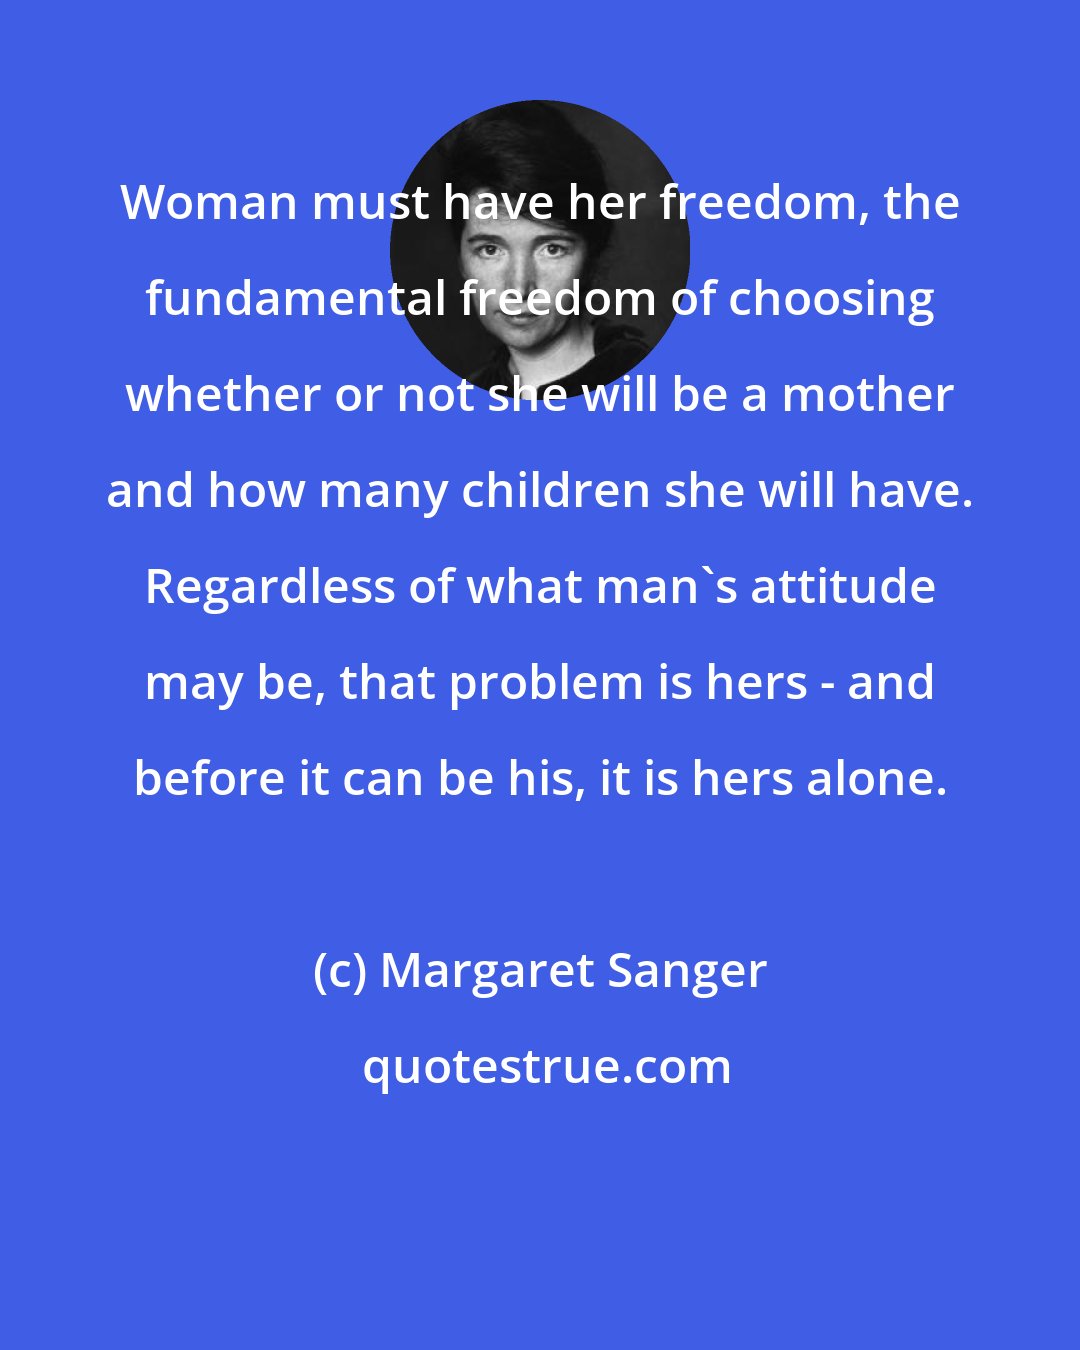 Margaret Sanger: Woman must have her freedom, the fundamental freedom of choosing whether or not she will be a mother and how many children she will have. Regardless of what man's attitude may be, that problem is hers - and before it can be his, it is hers alone.